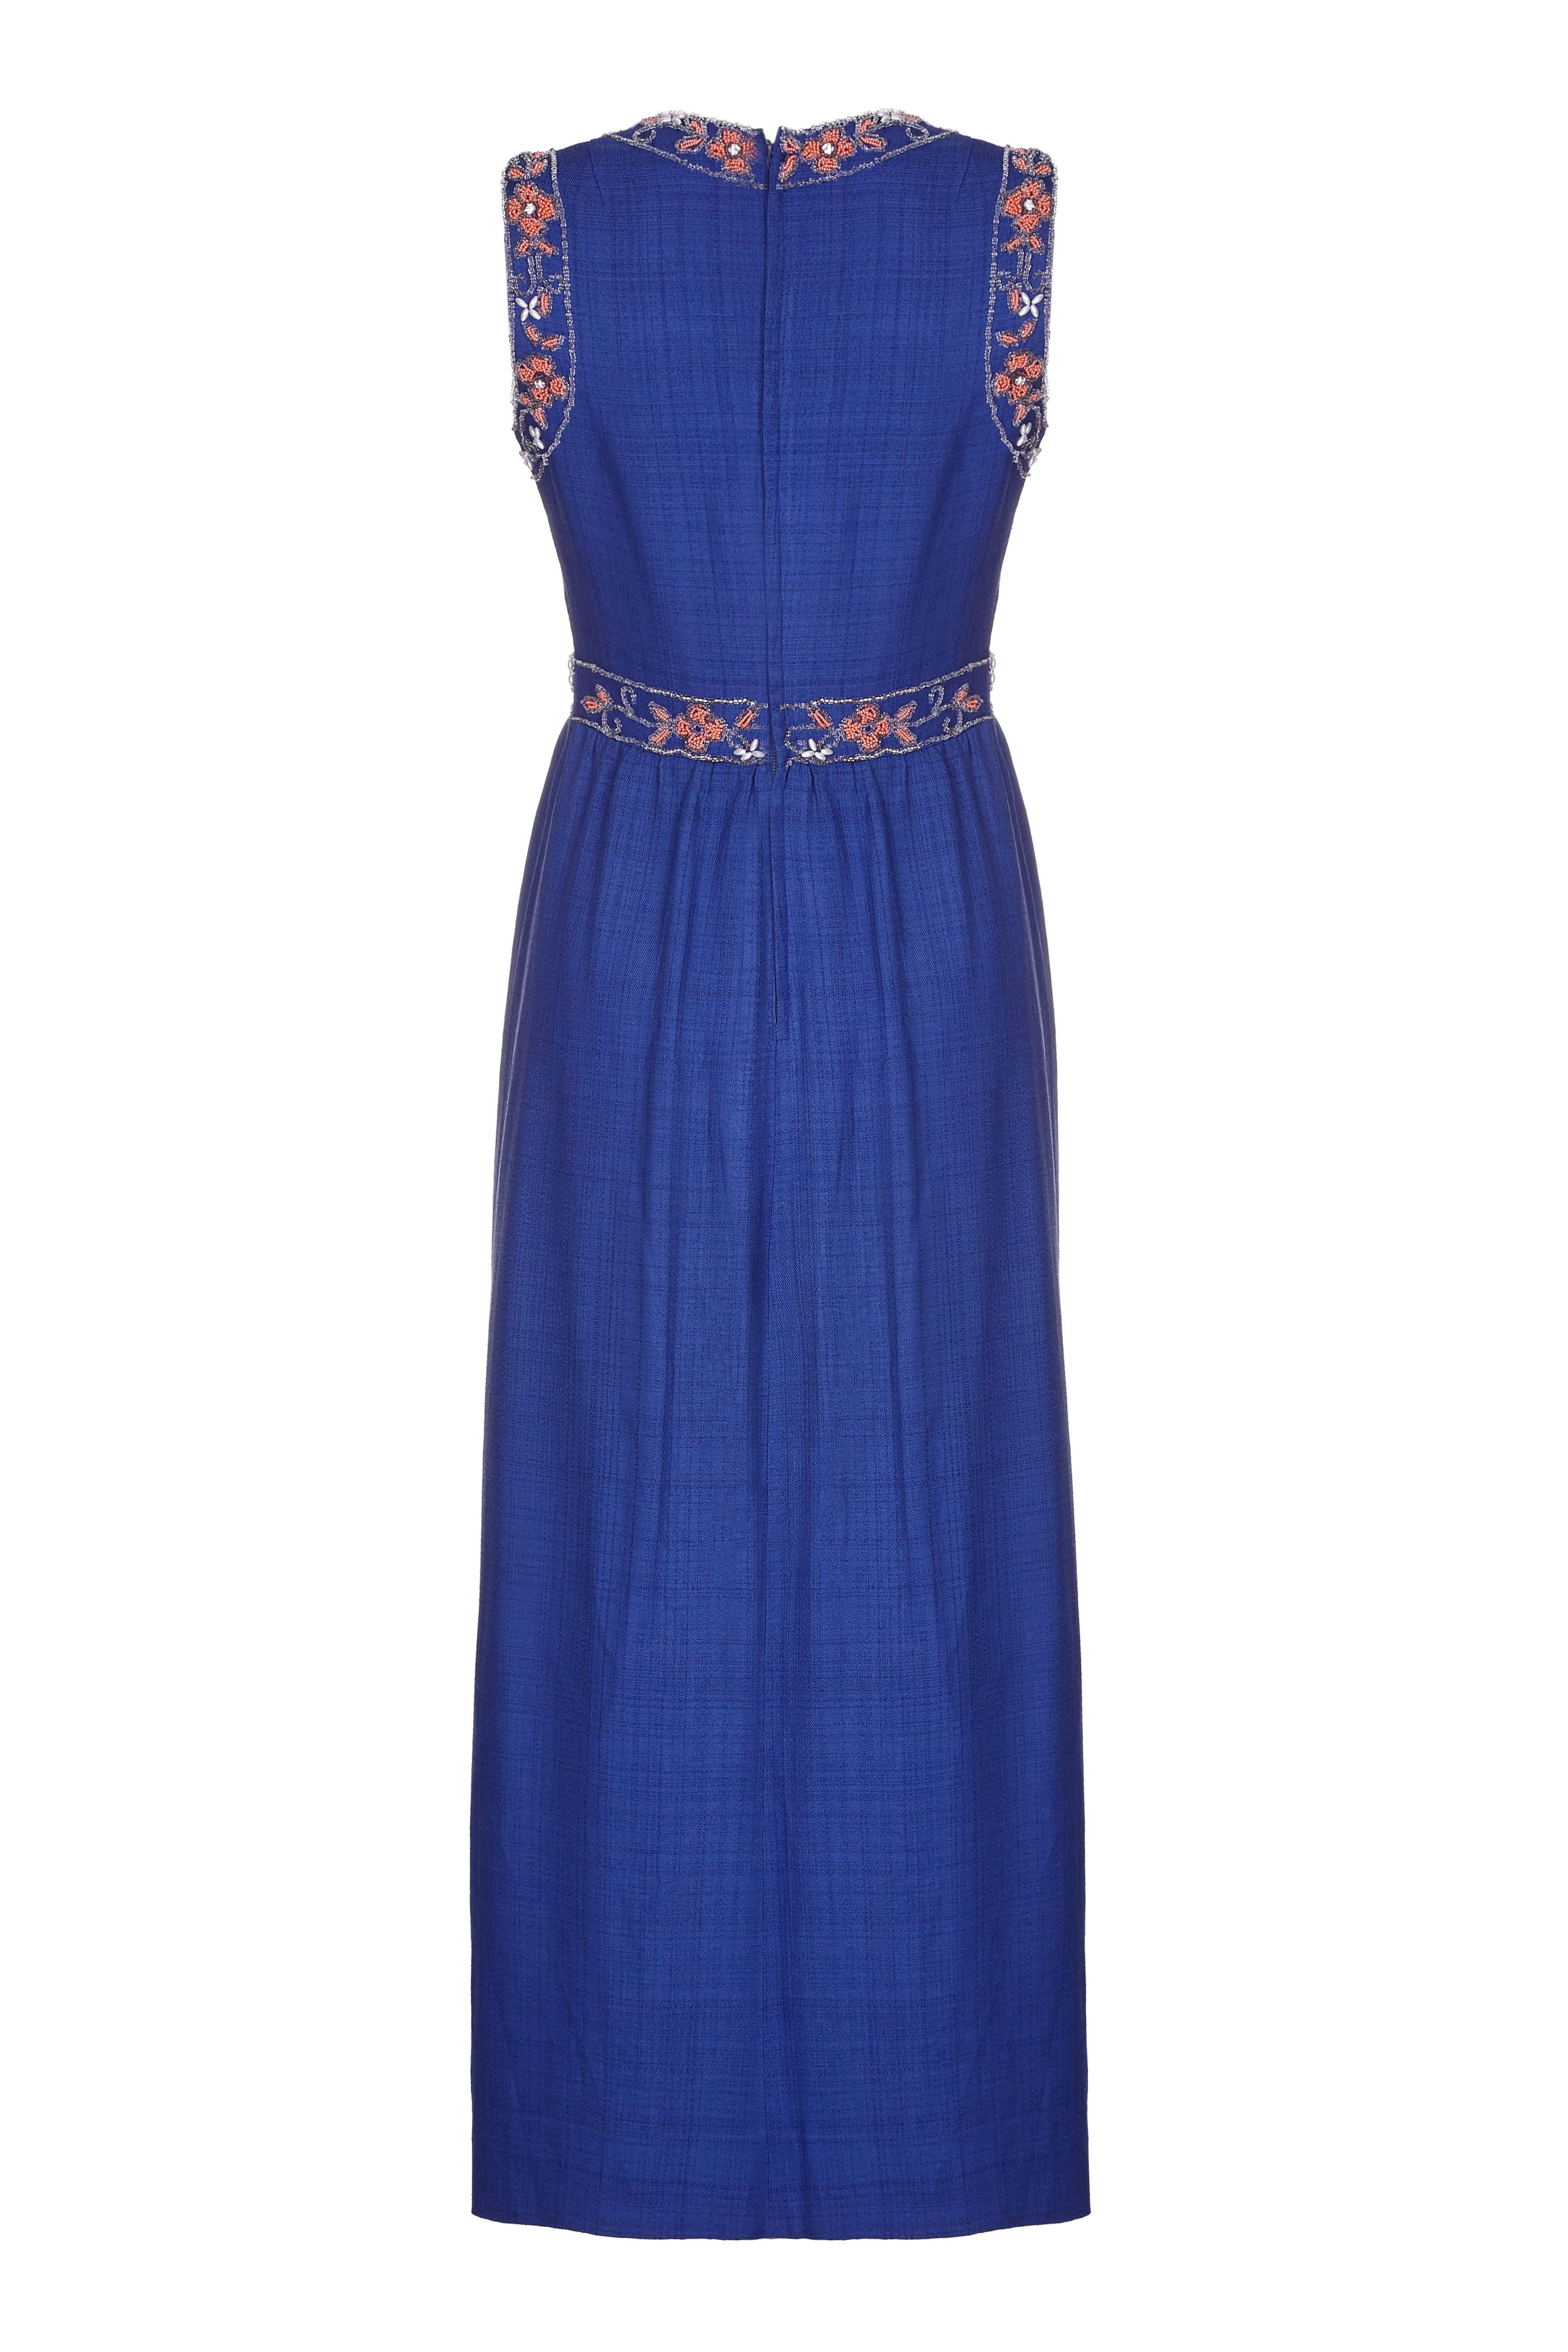 This elegant vintage 1970s Susan Small maxi dress in a cobalt blue silk and linen mix is of superb quality and features some exquisite embellishment on the bodice, neckline and arms. The delicate coral and crystal toned rocaille beading is